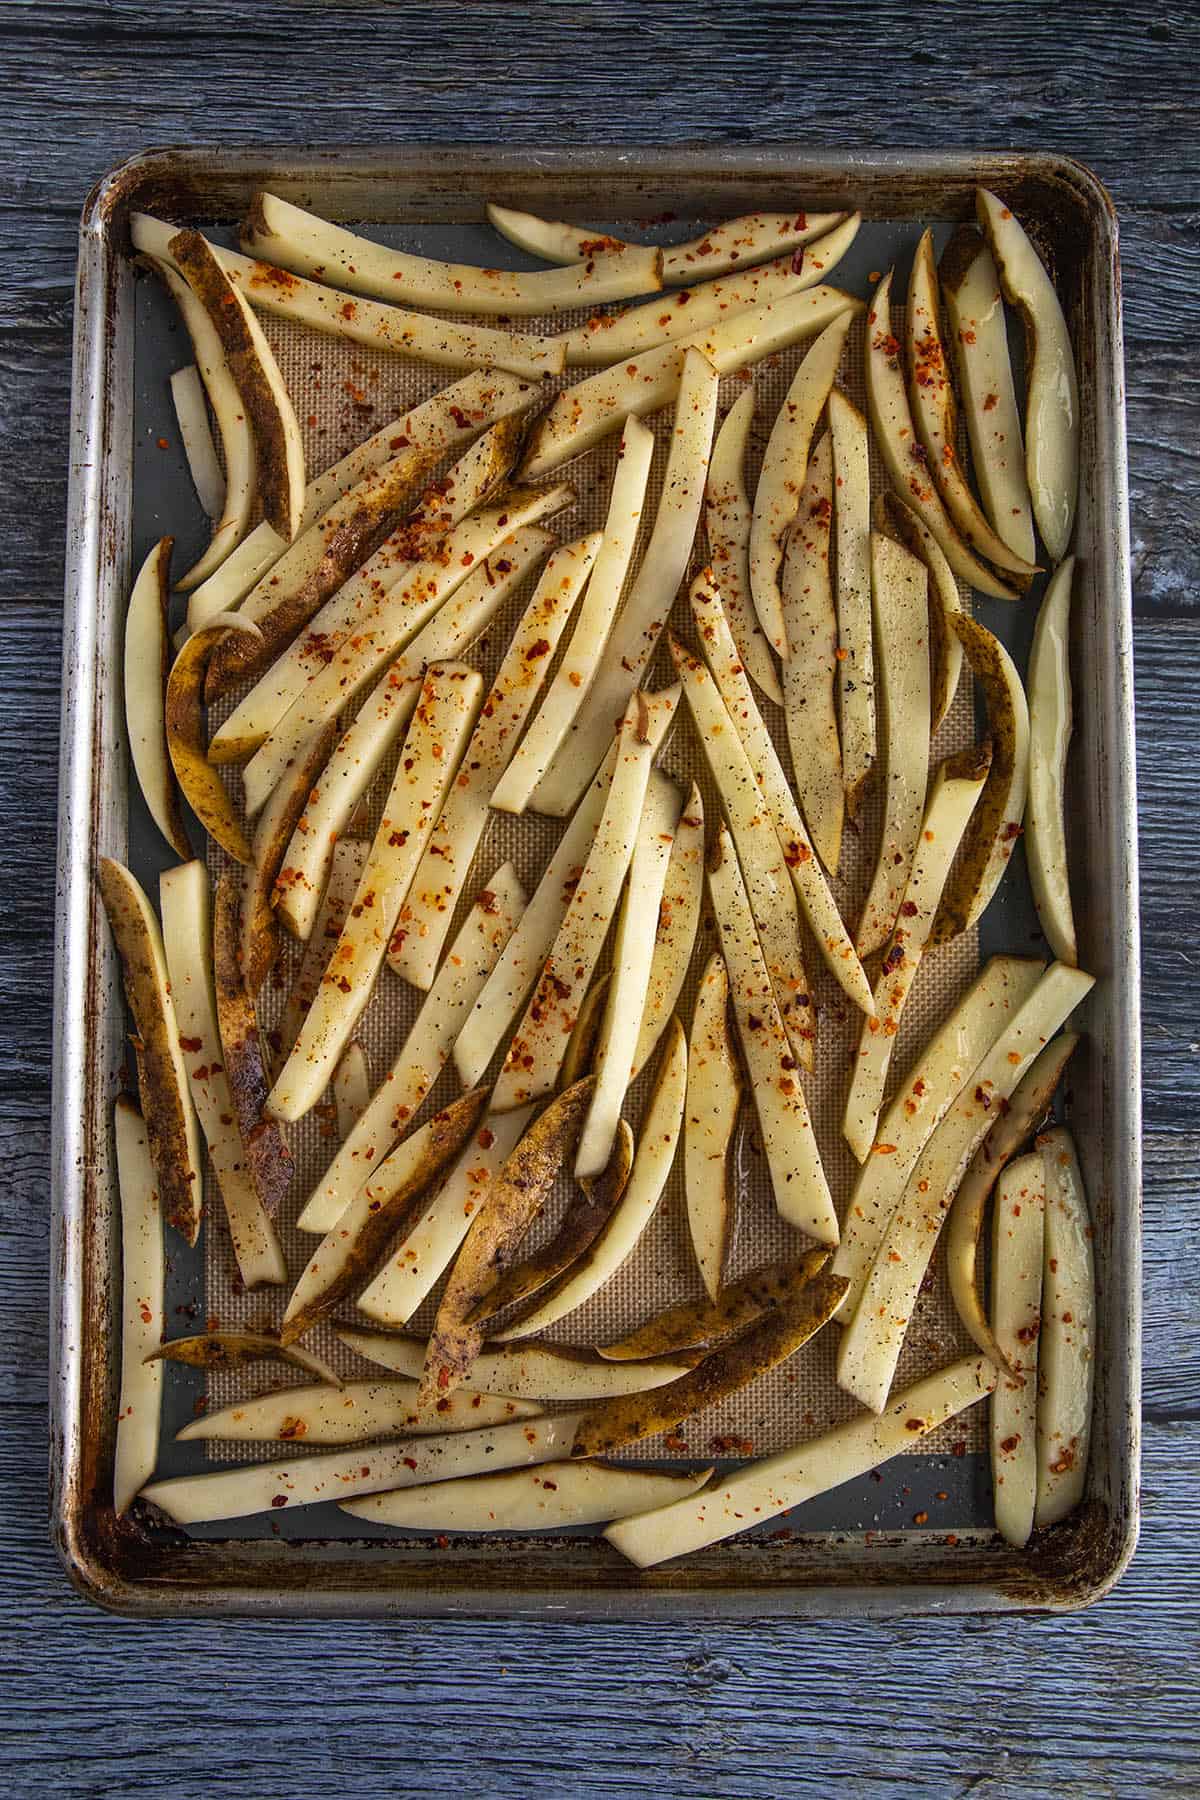 Seasoned french fries, ready for the oven